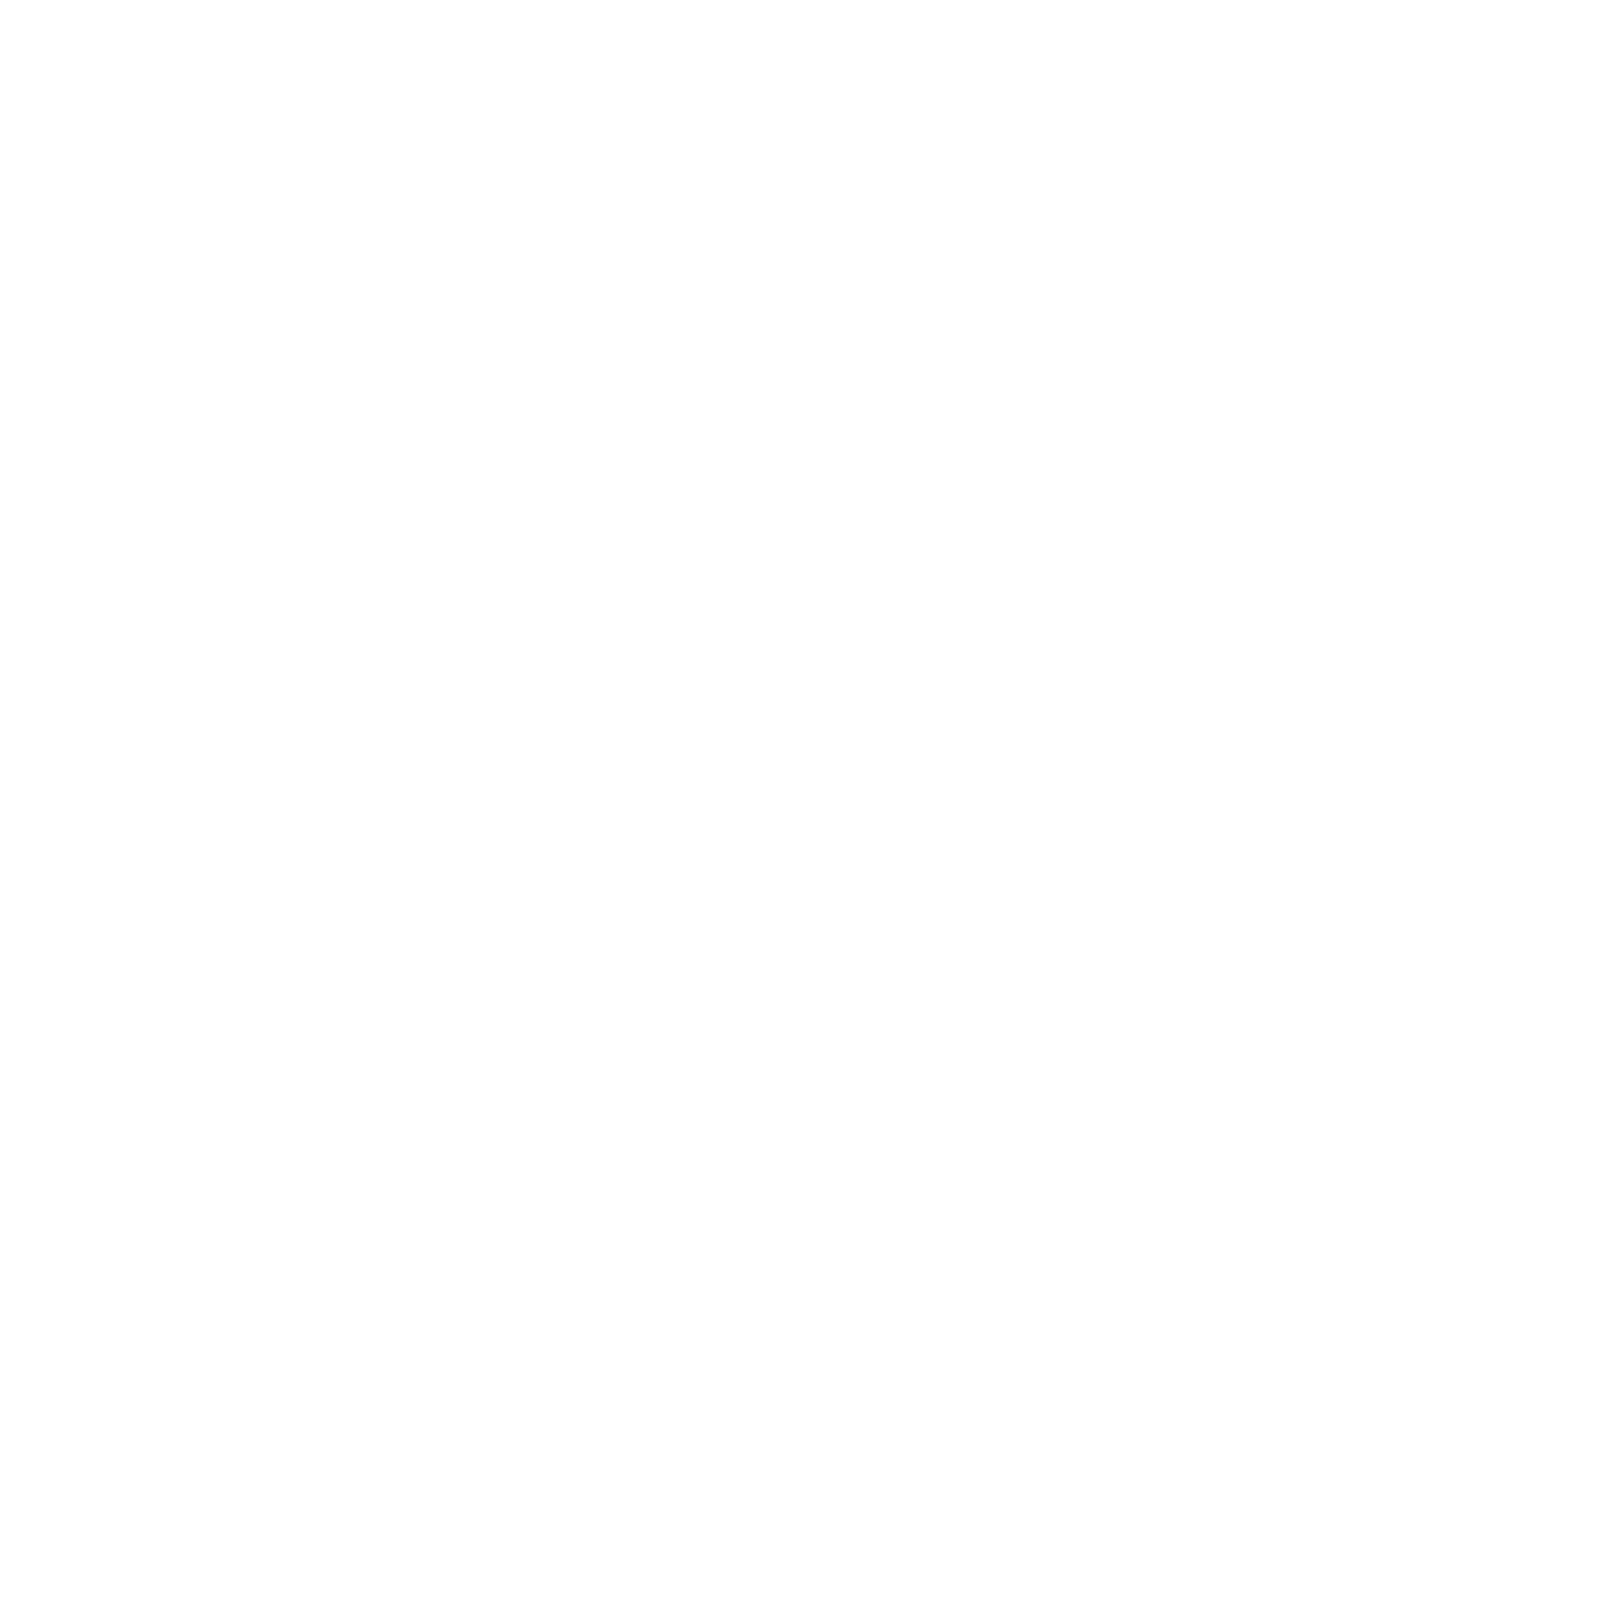 Gm Backgrounds